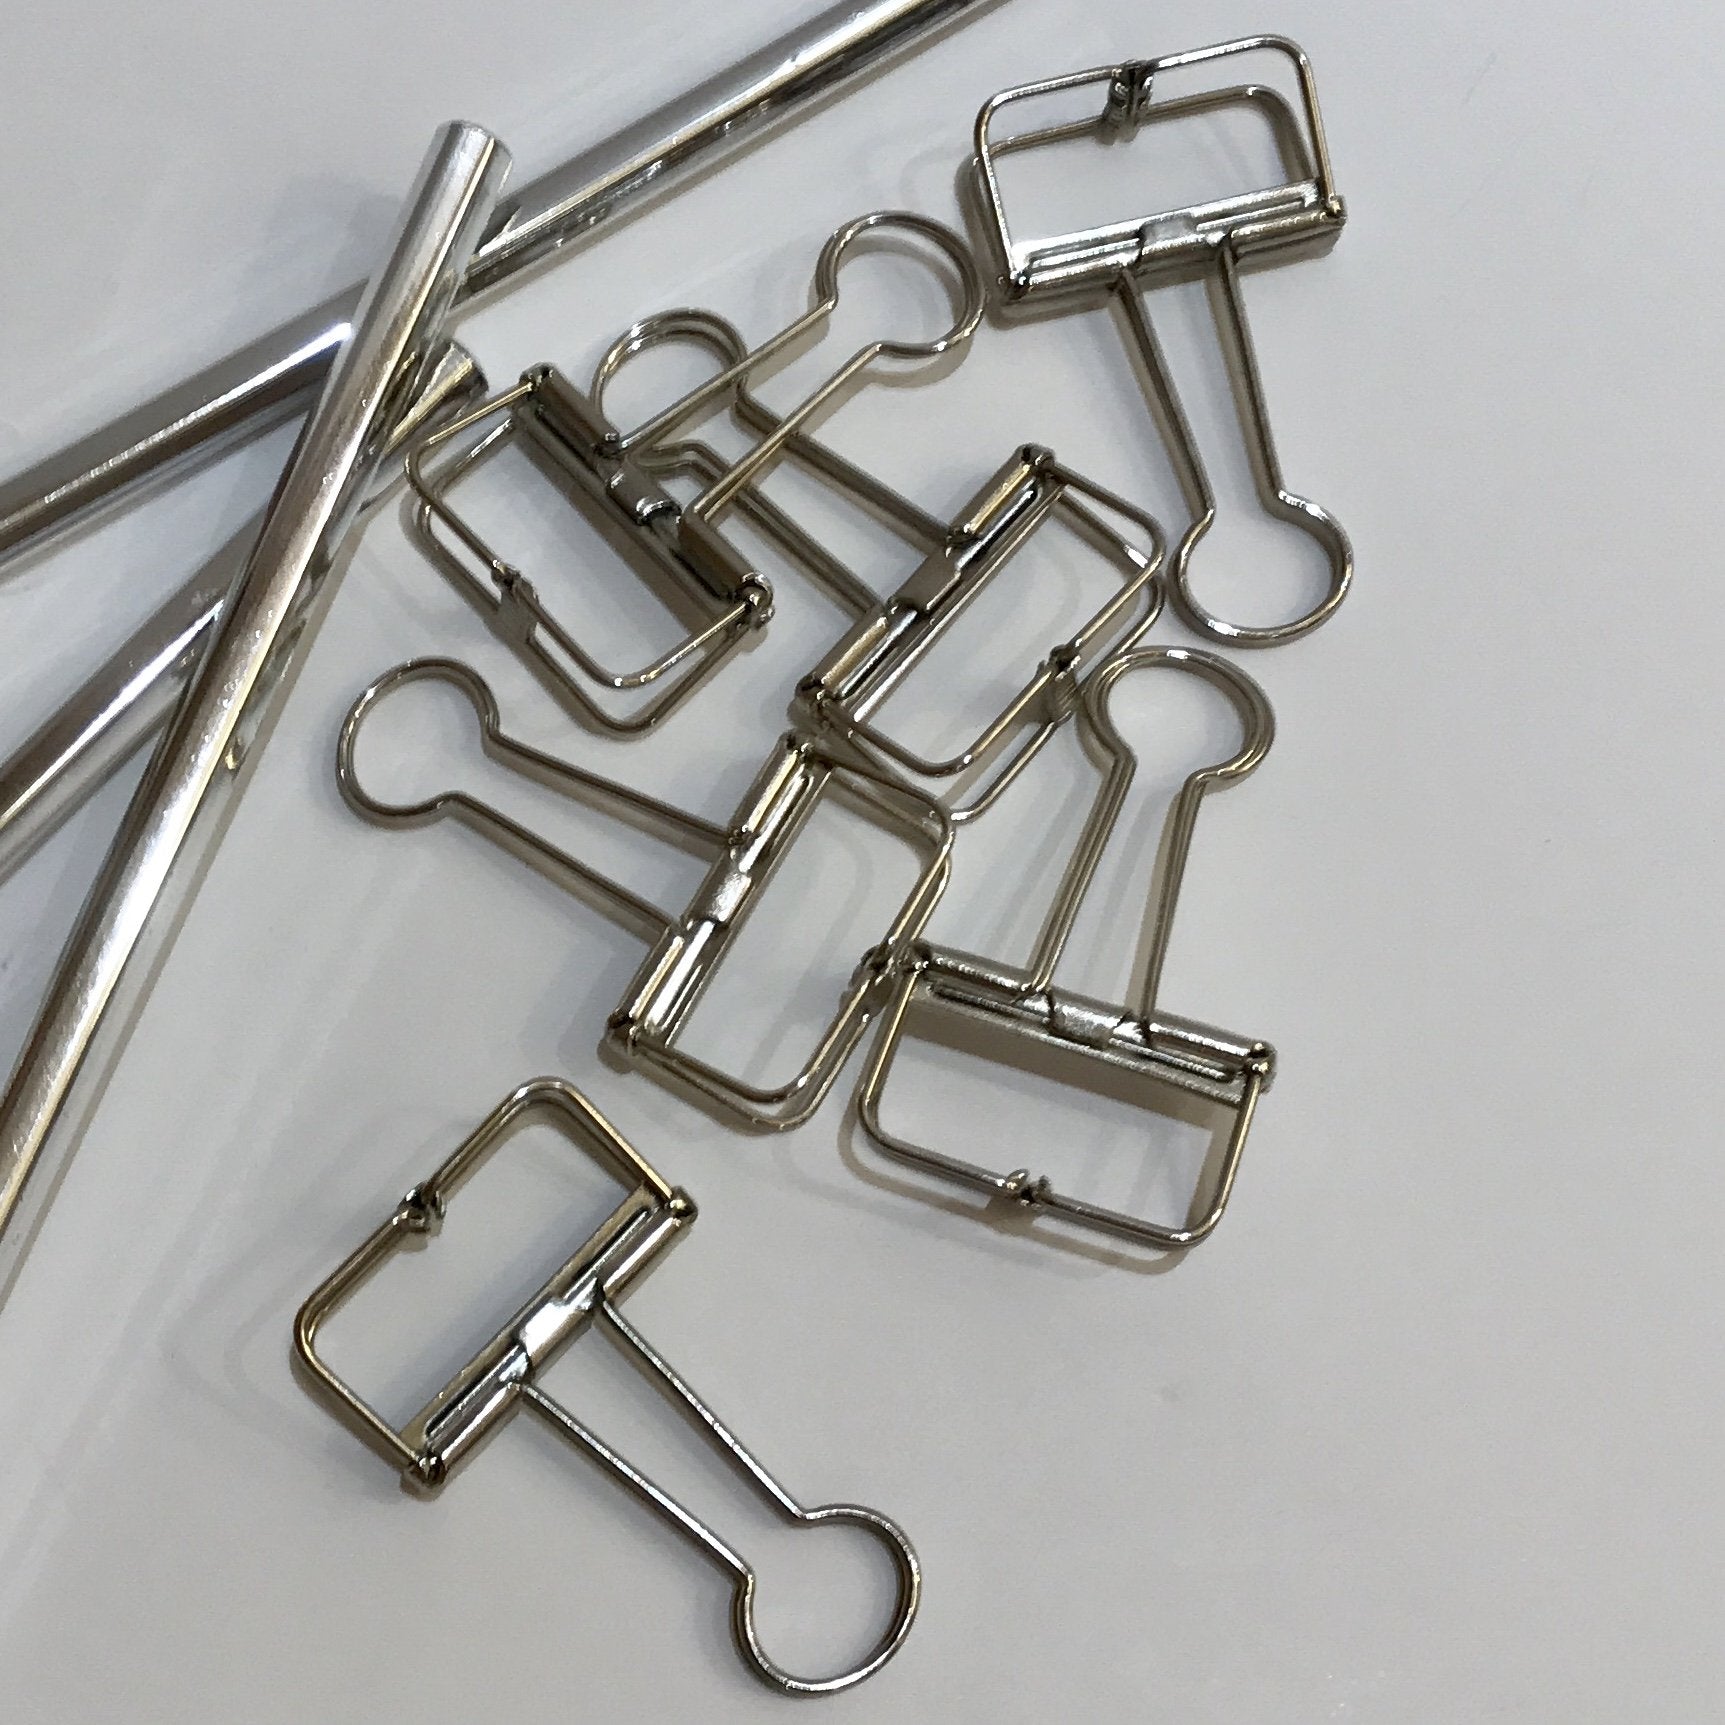 silver and gold binder clips